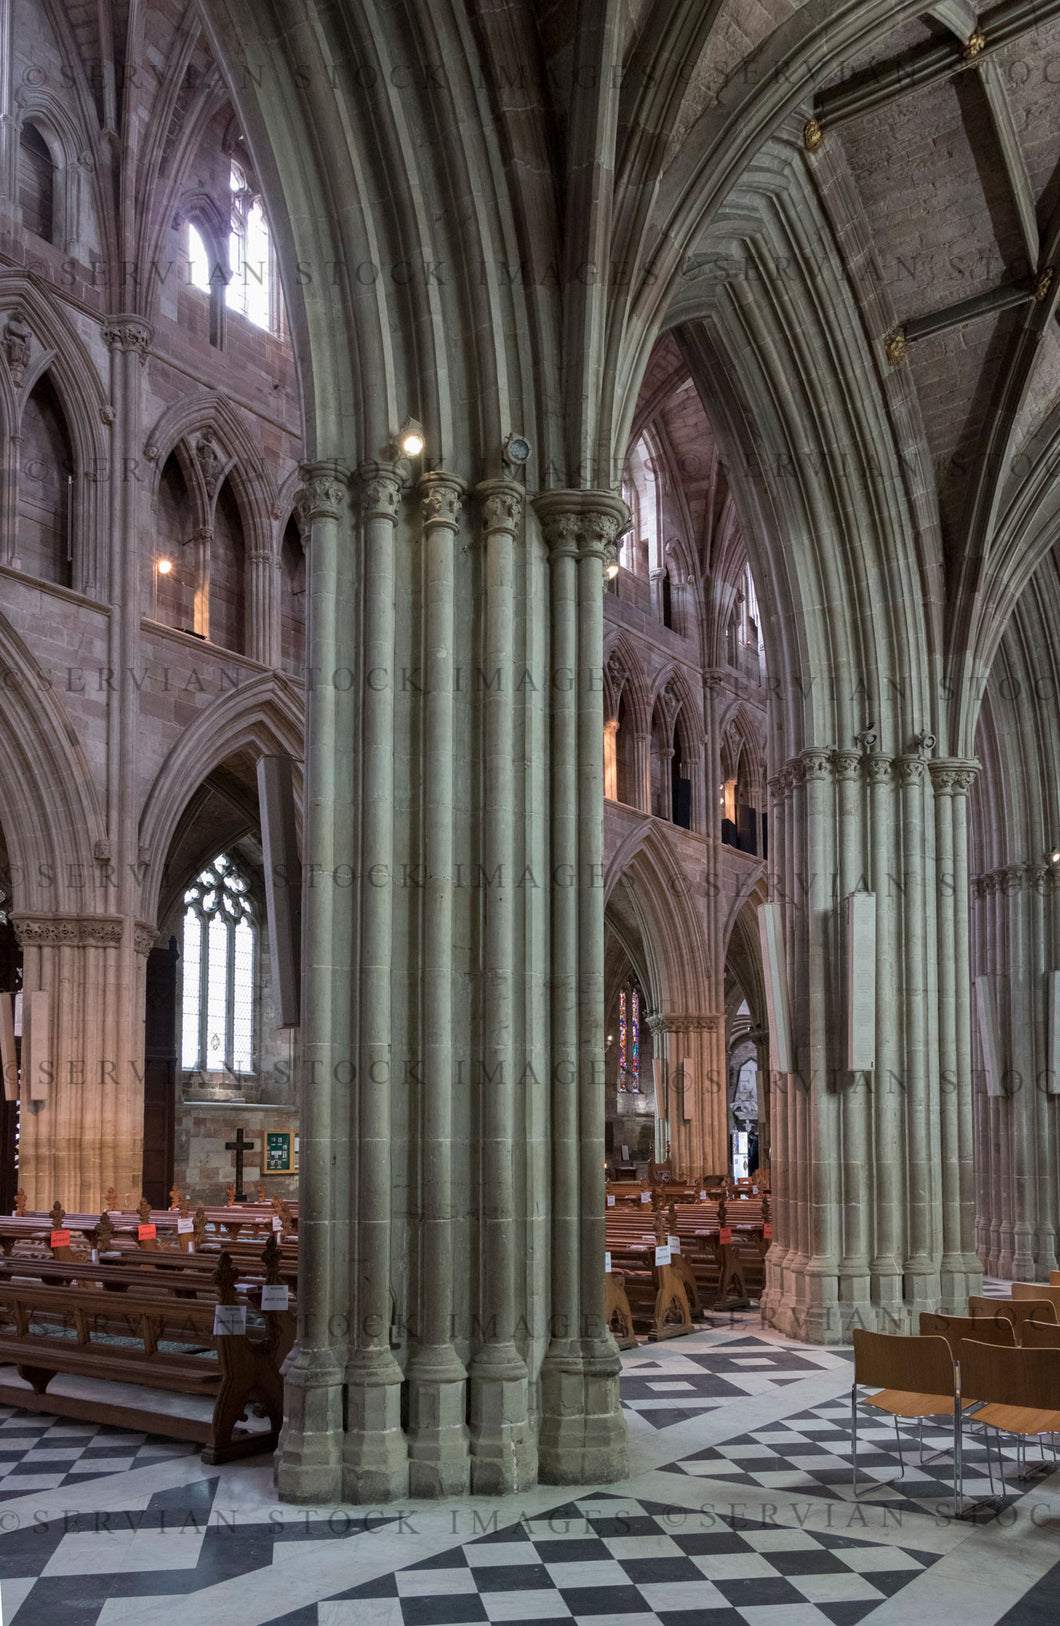 Historical building - Cathedral interior, UK (Nick 2214)